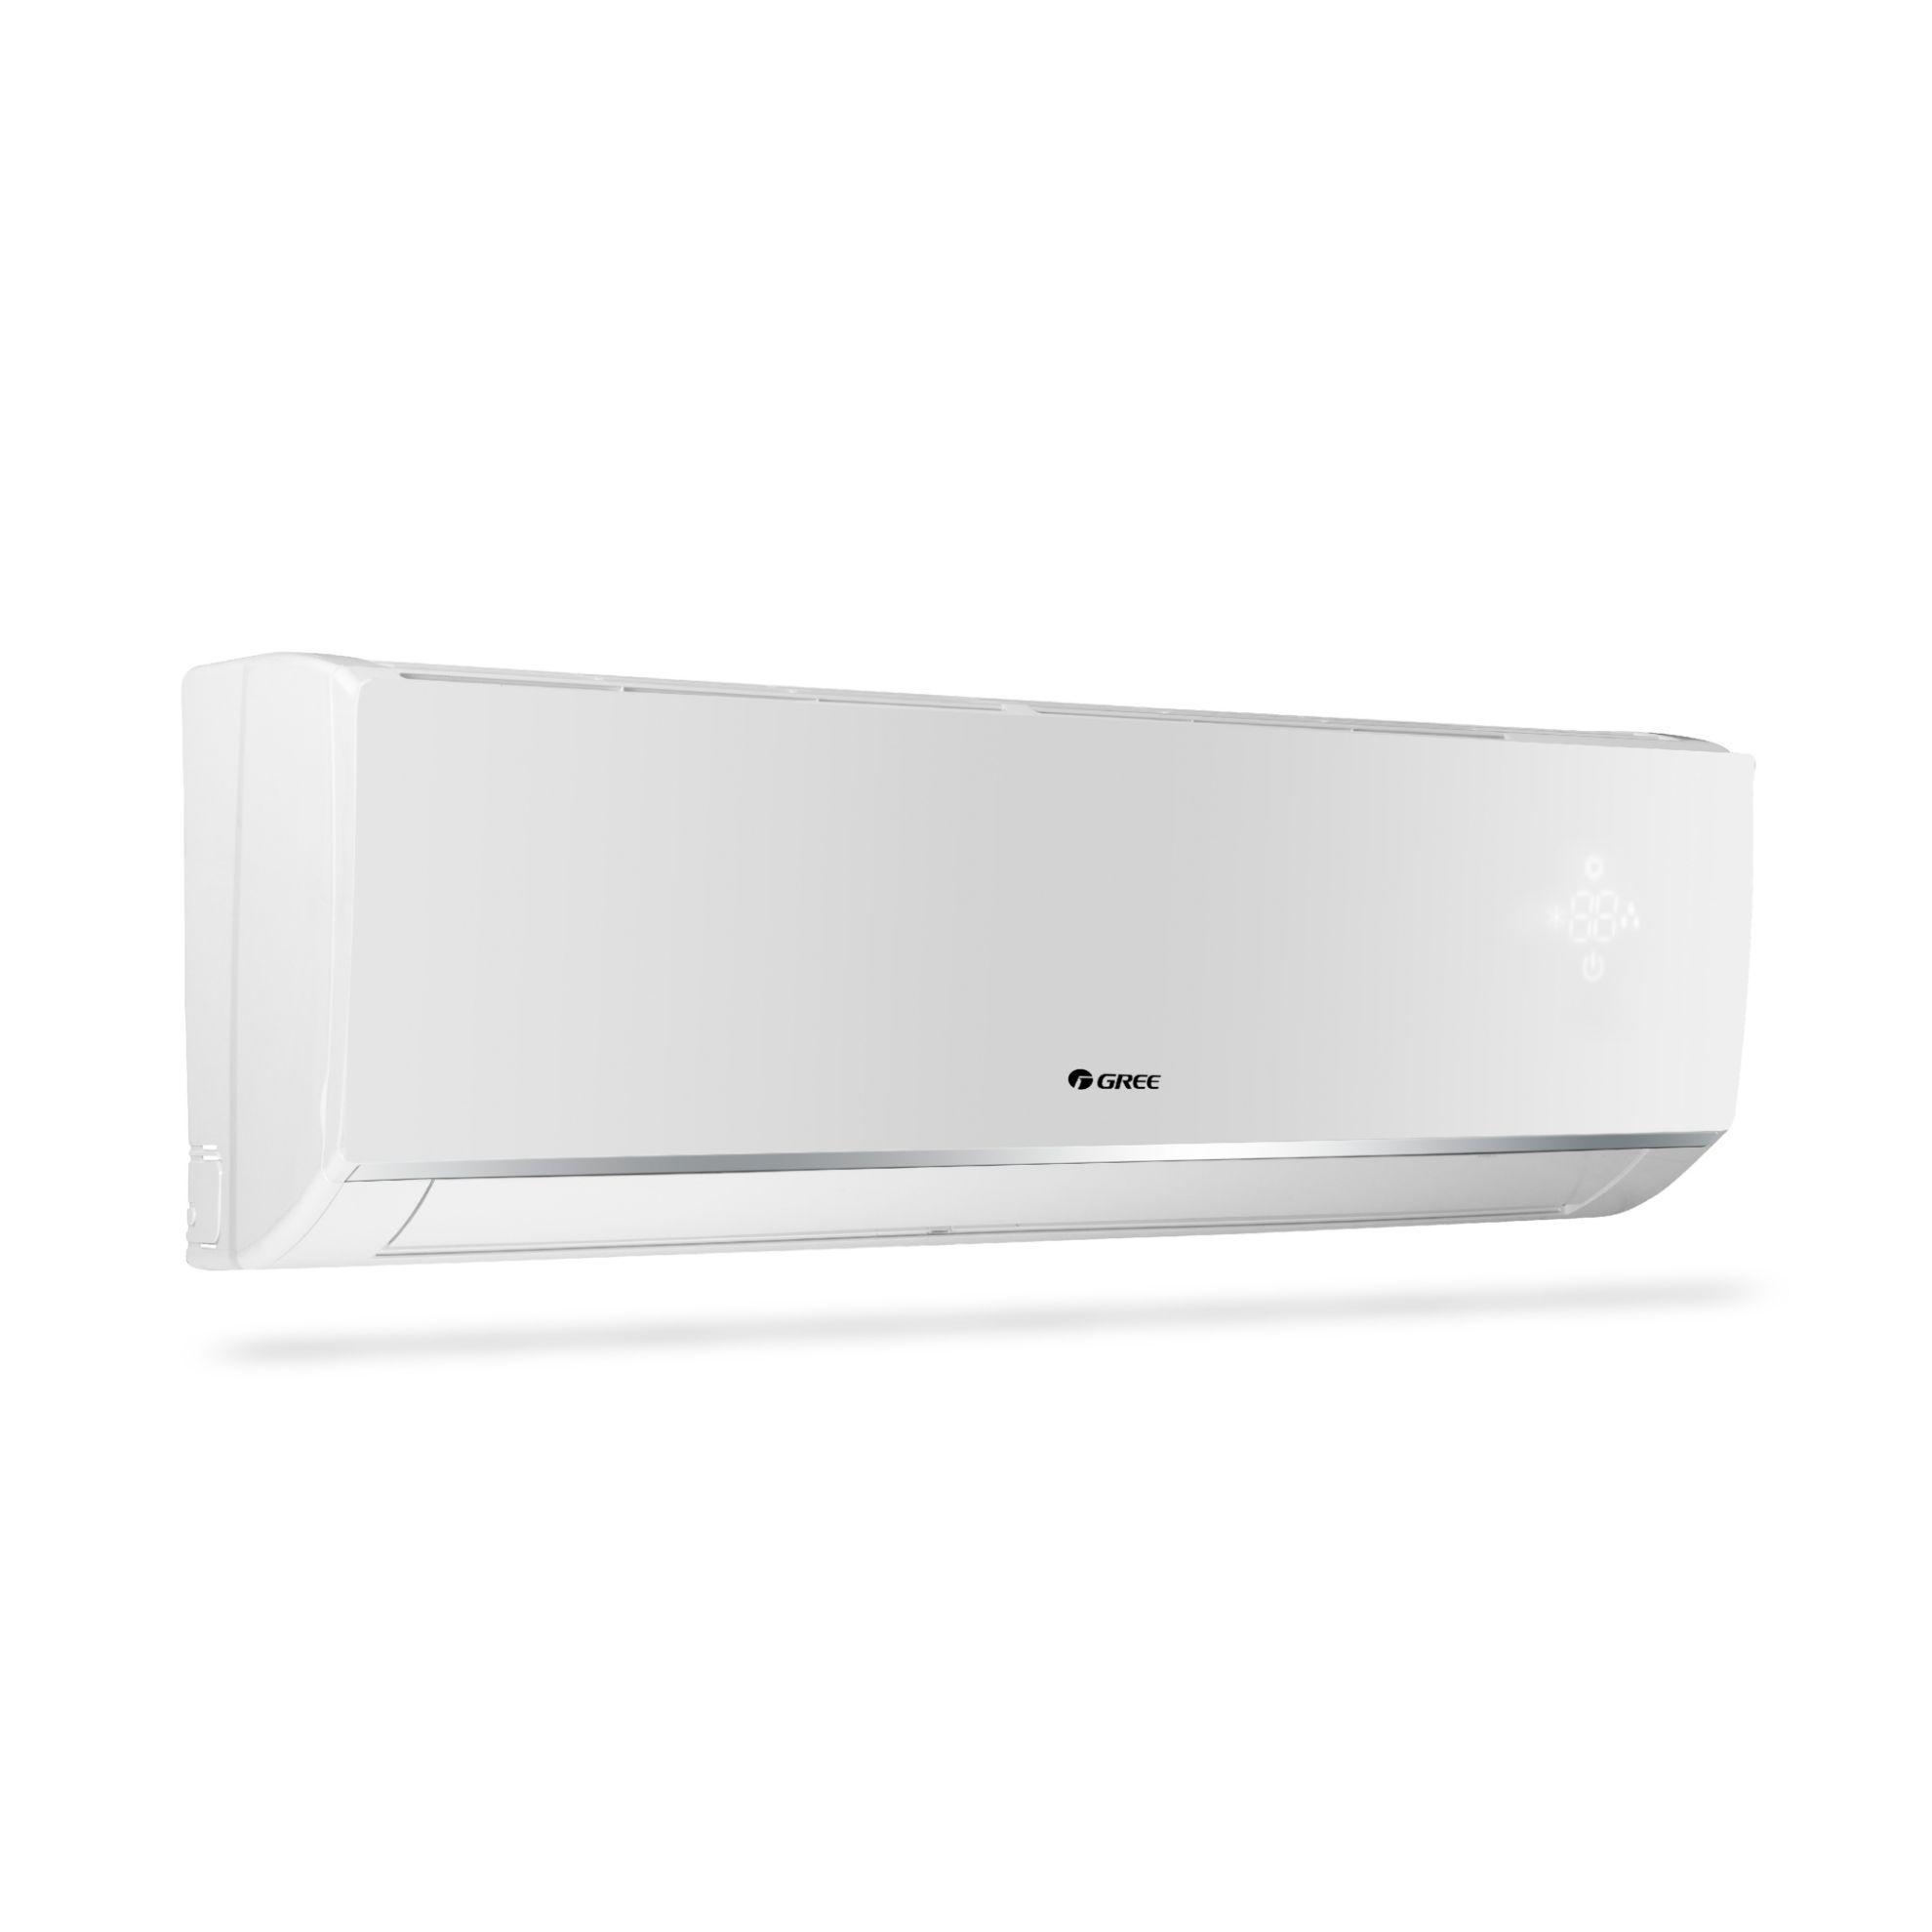 Picture of Gree - Lomo-P32C3 - 2.5 Ton|Reciprocating|Wall Split AC